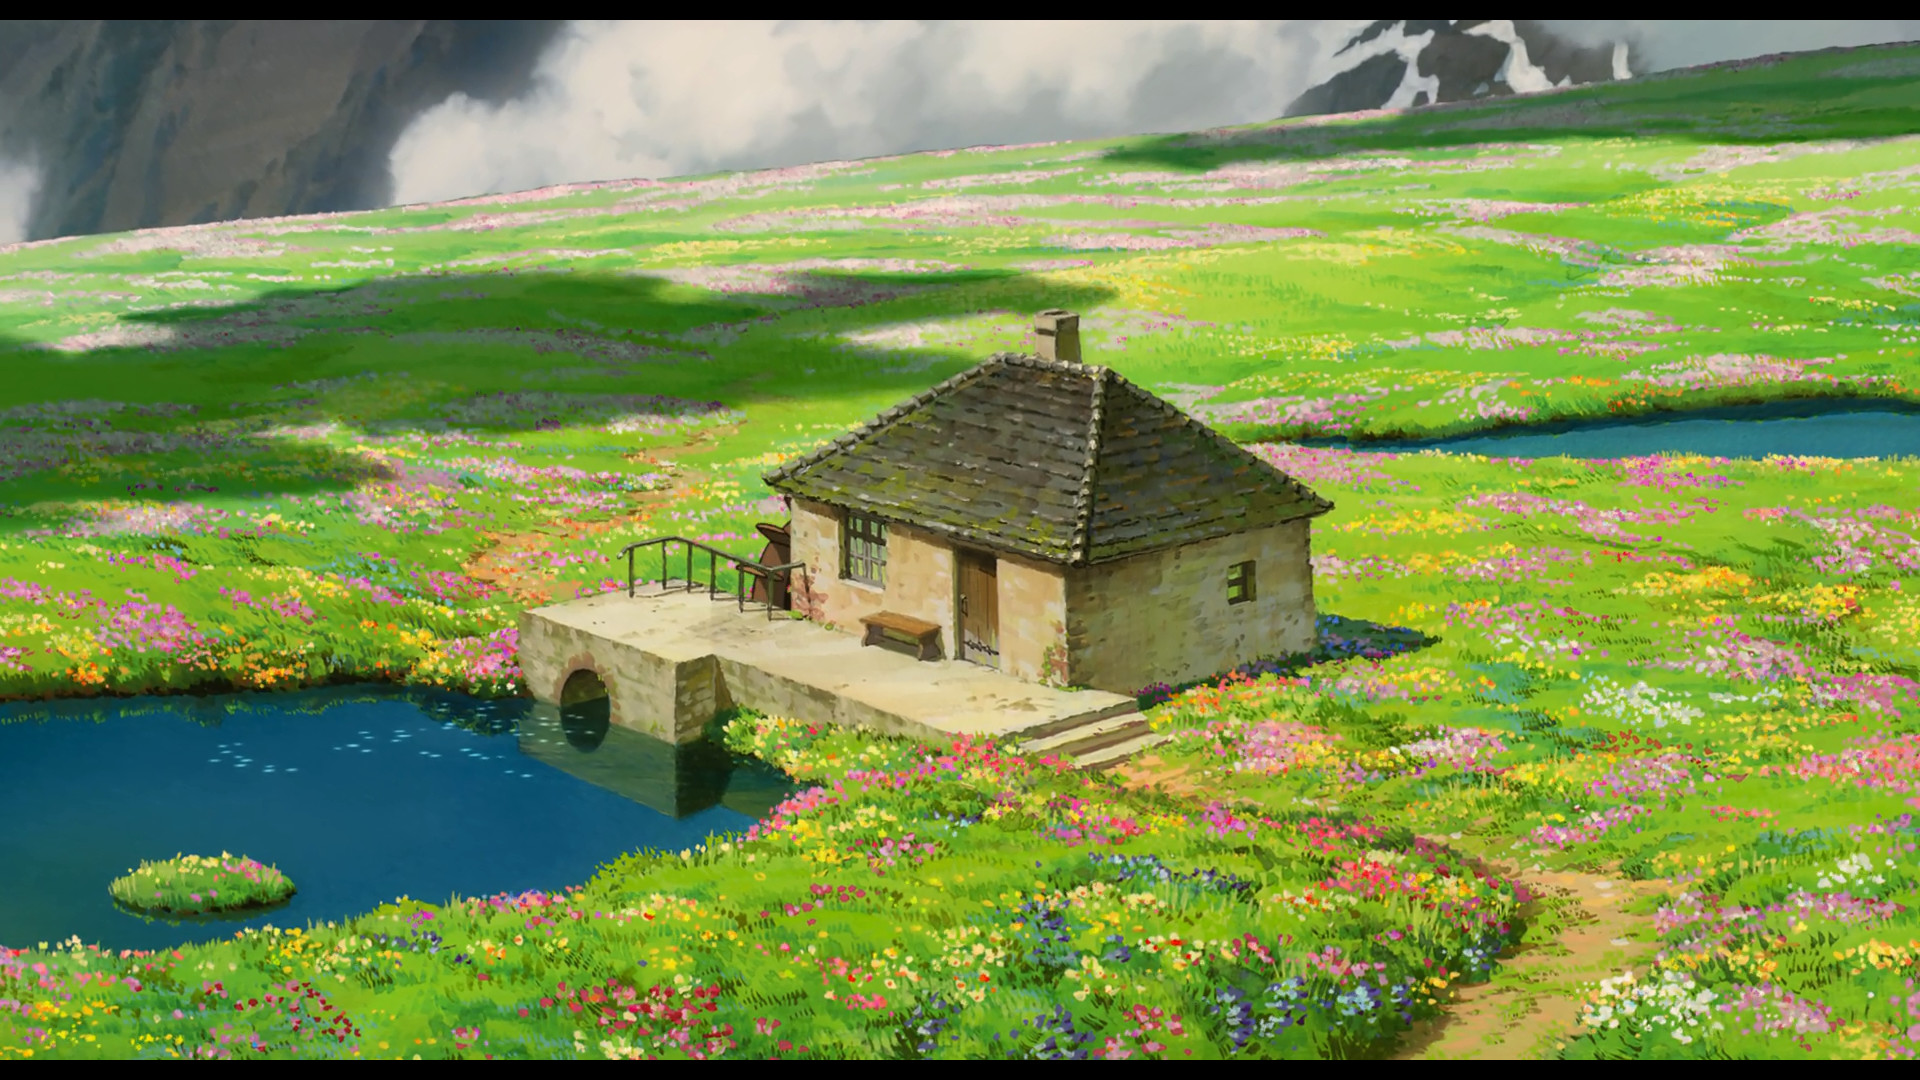 Anime anime Studio Ghibli landscape house water field cottage flowers peaceful Howls Moving Castle